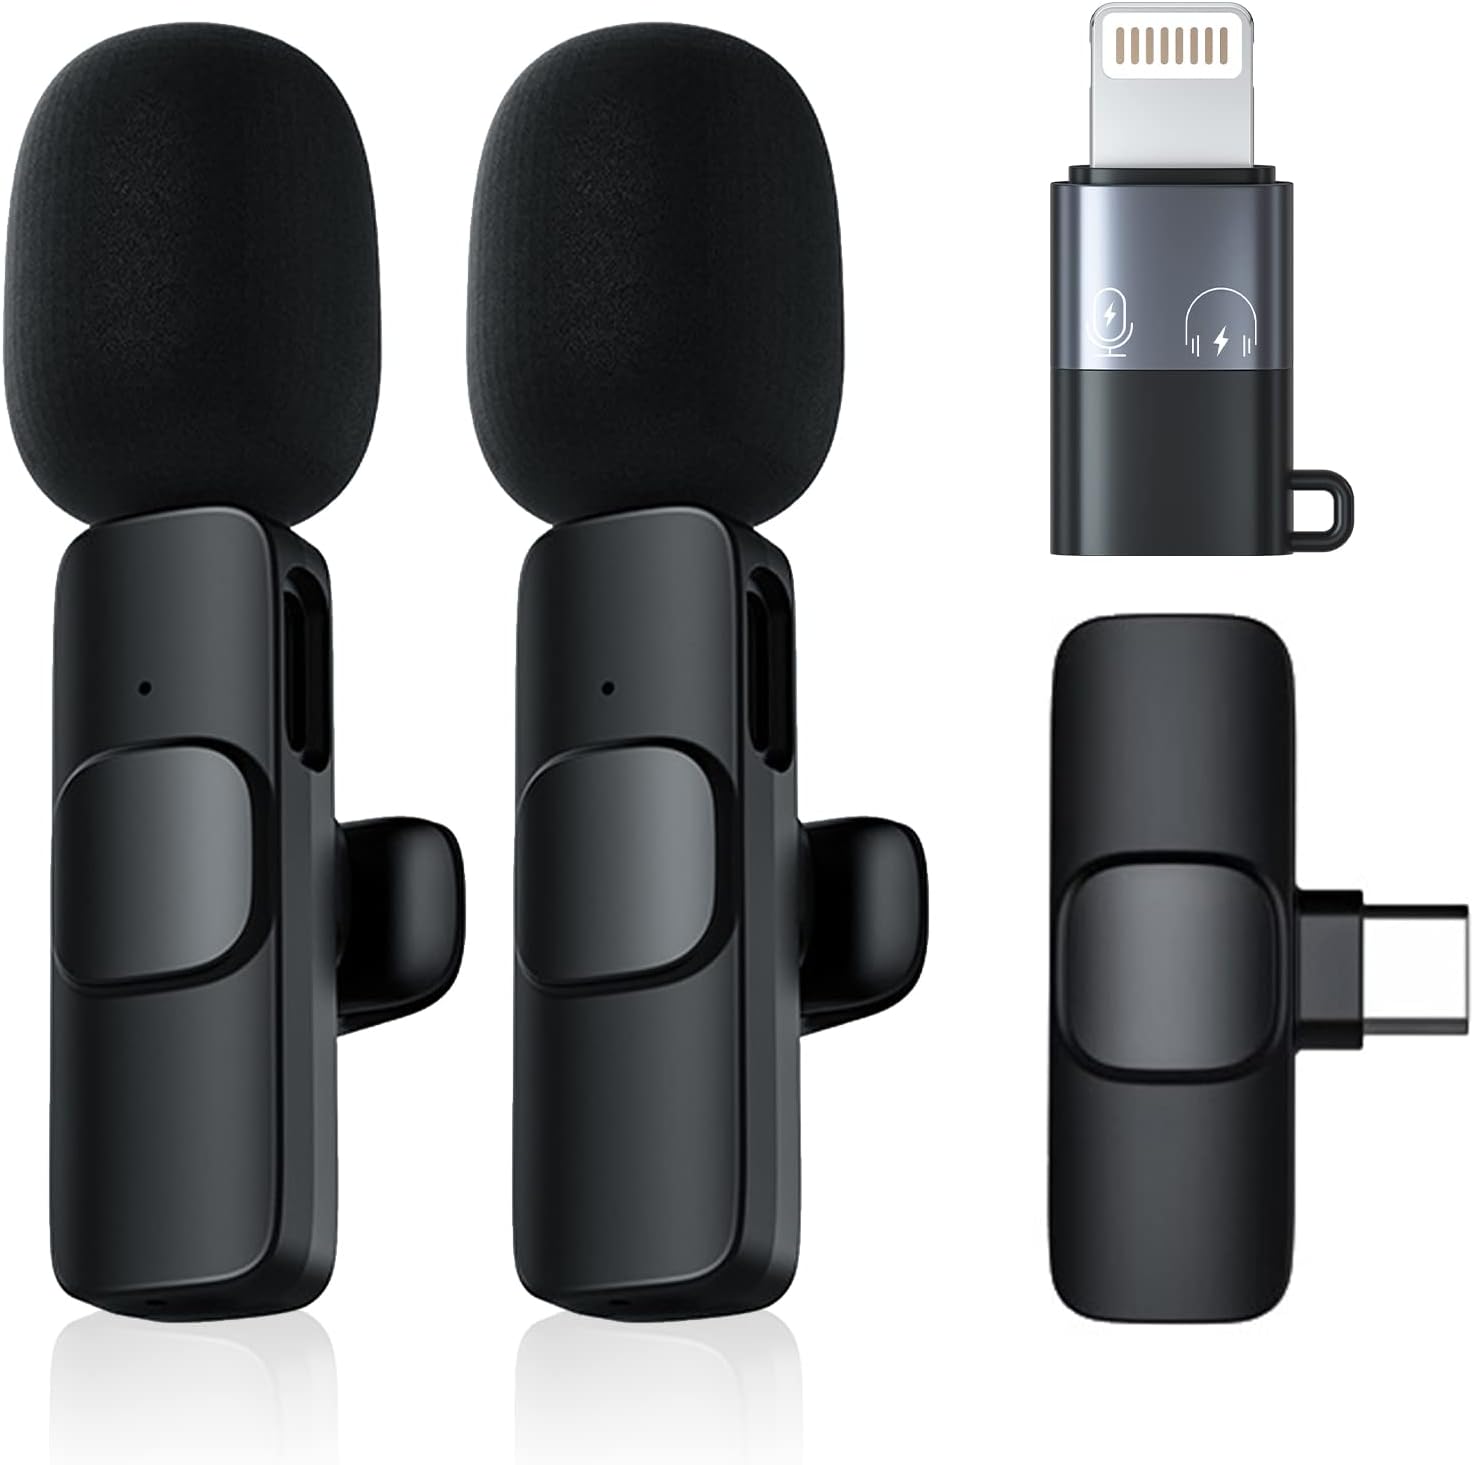 Wireless Clip Microphone: The Latest Technology for Enhanced Audio Quality